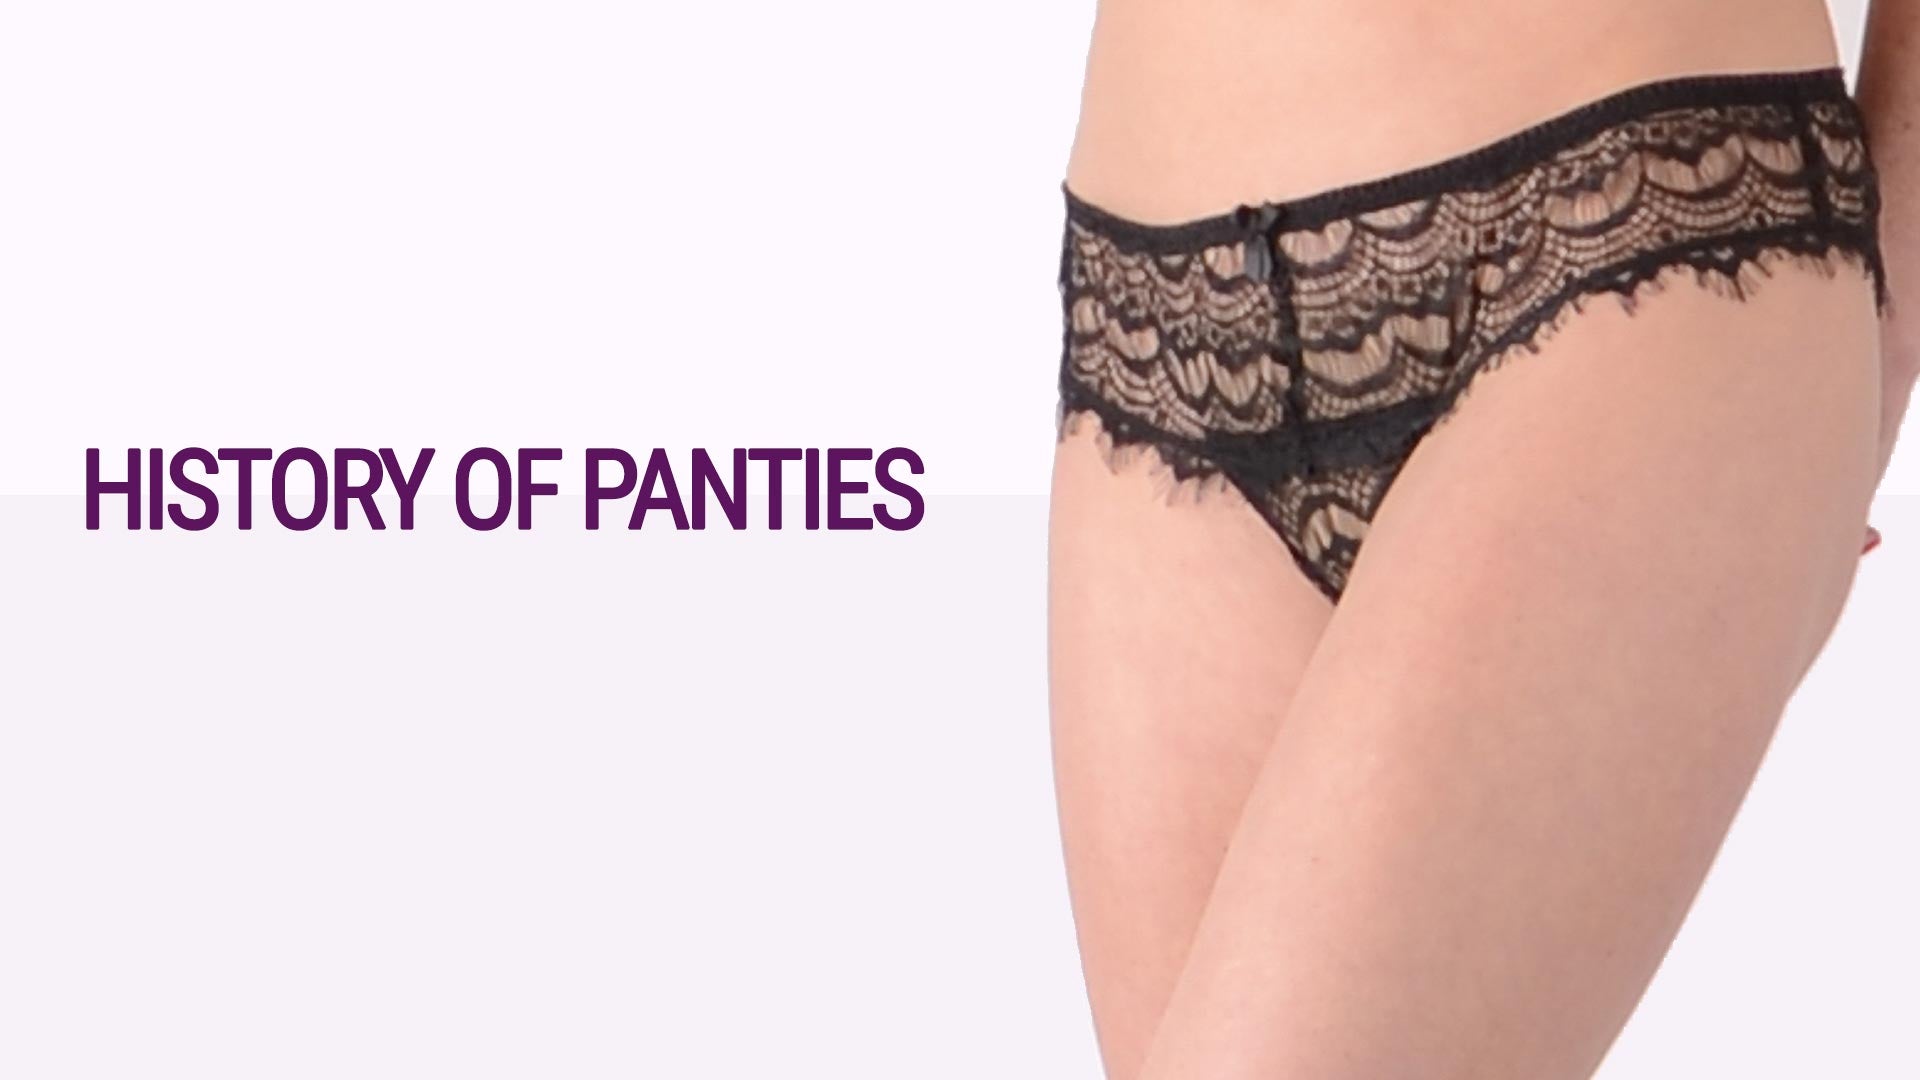 Undergarments History, Women's Pants, Drawers Underwear, Briefs, and Knickers  Fashion